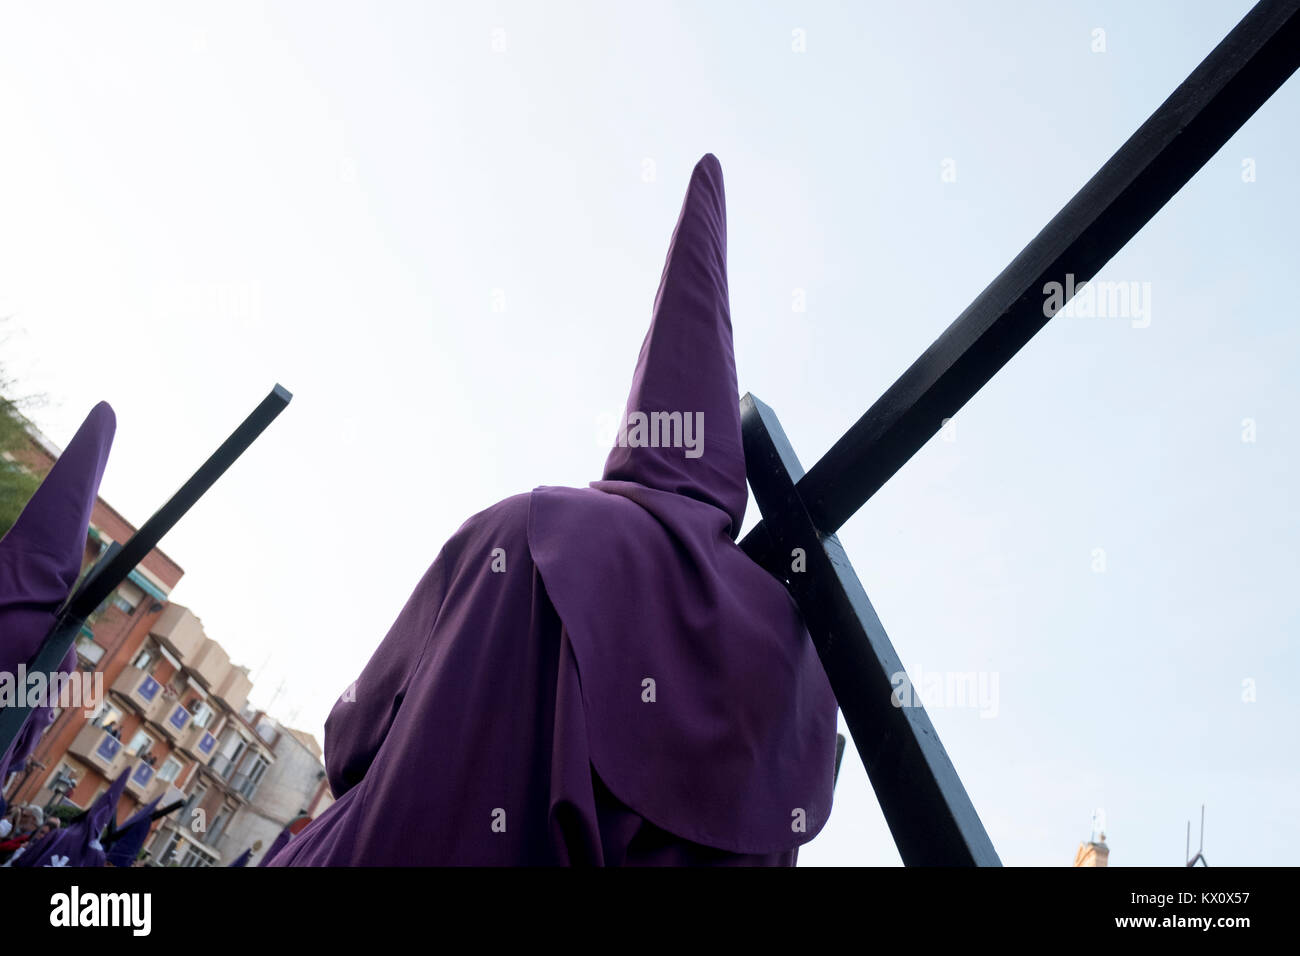 During the Semana Santa ceremonies, penitents carry crosses through the streets of Murcia in Spain Stock Photo